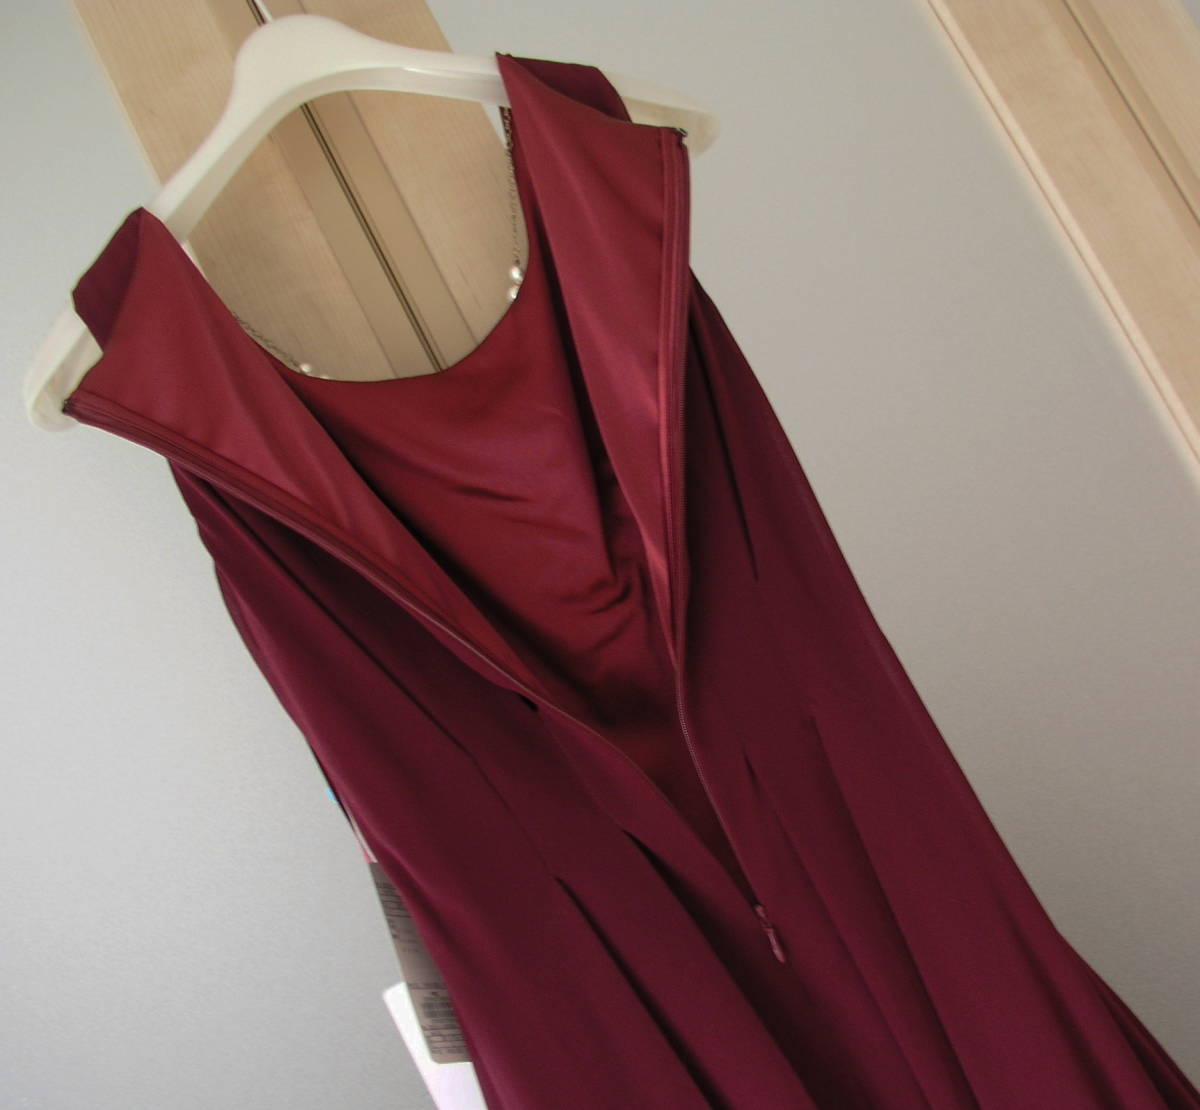  wedding *. call * beautiful Silhouette dress *size2|9 number |M* bordeaux Y19,440. . goods 